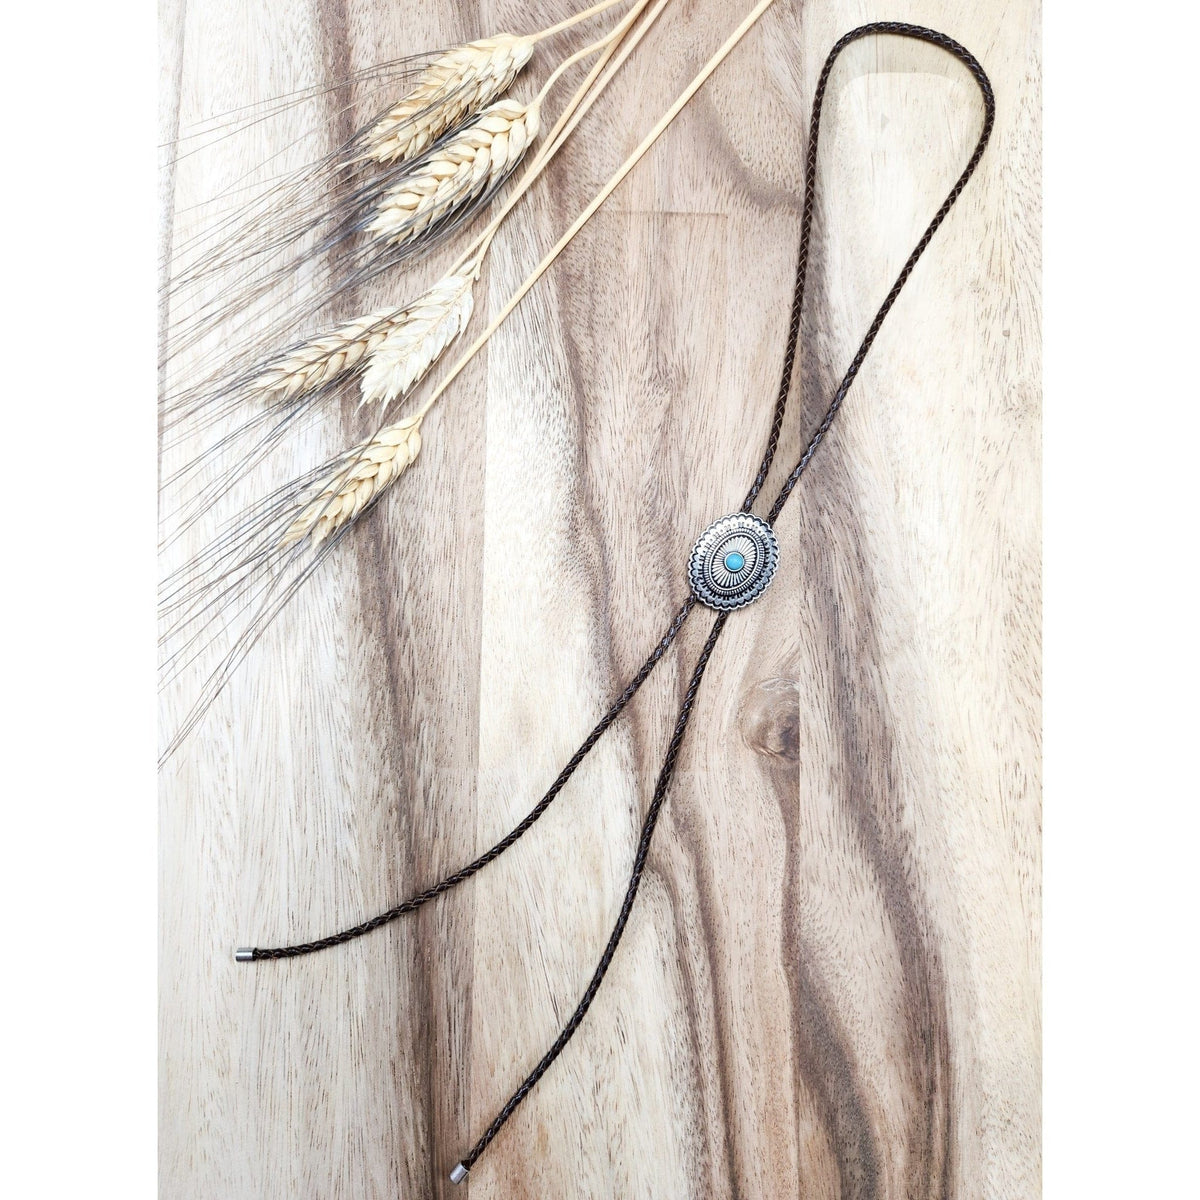 Western Concho Bolo Tie Necklace Western Necklace TheFringeCultureCollective